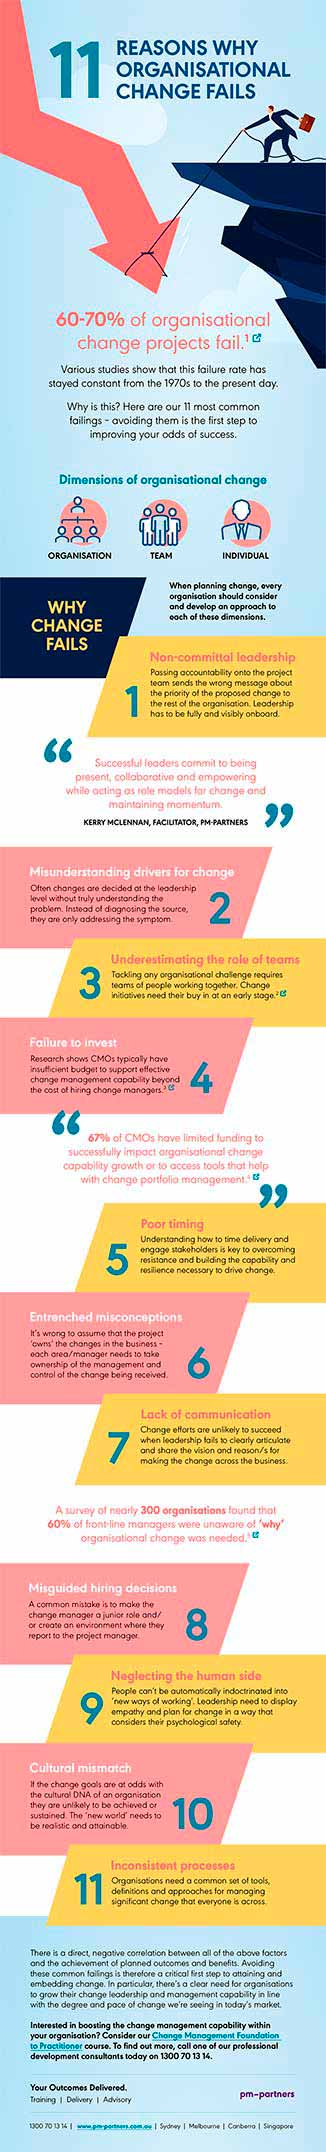 11 reasons why organisational change fails infographic